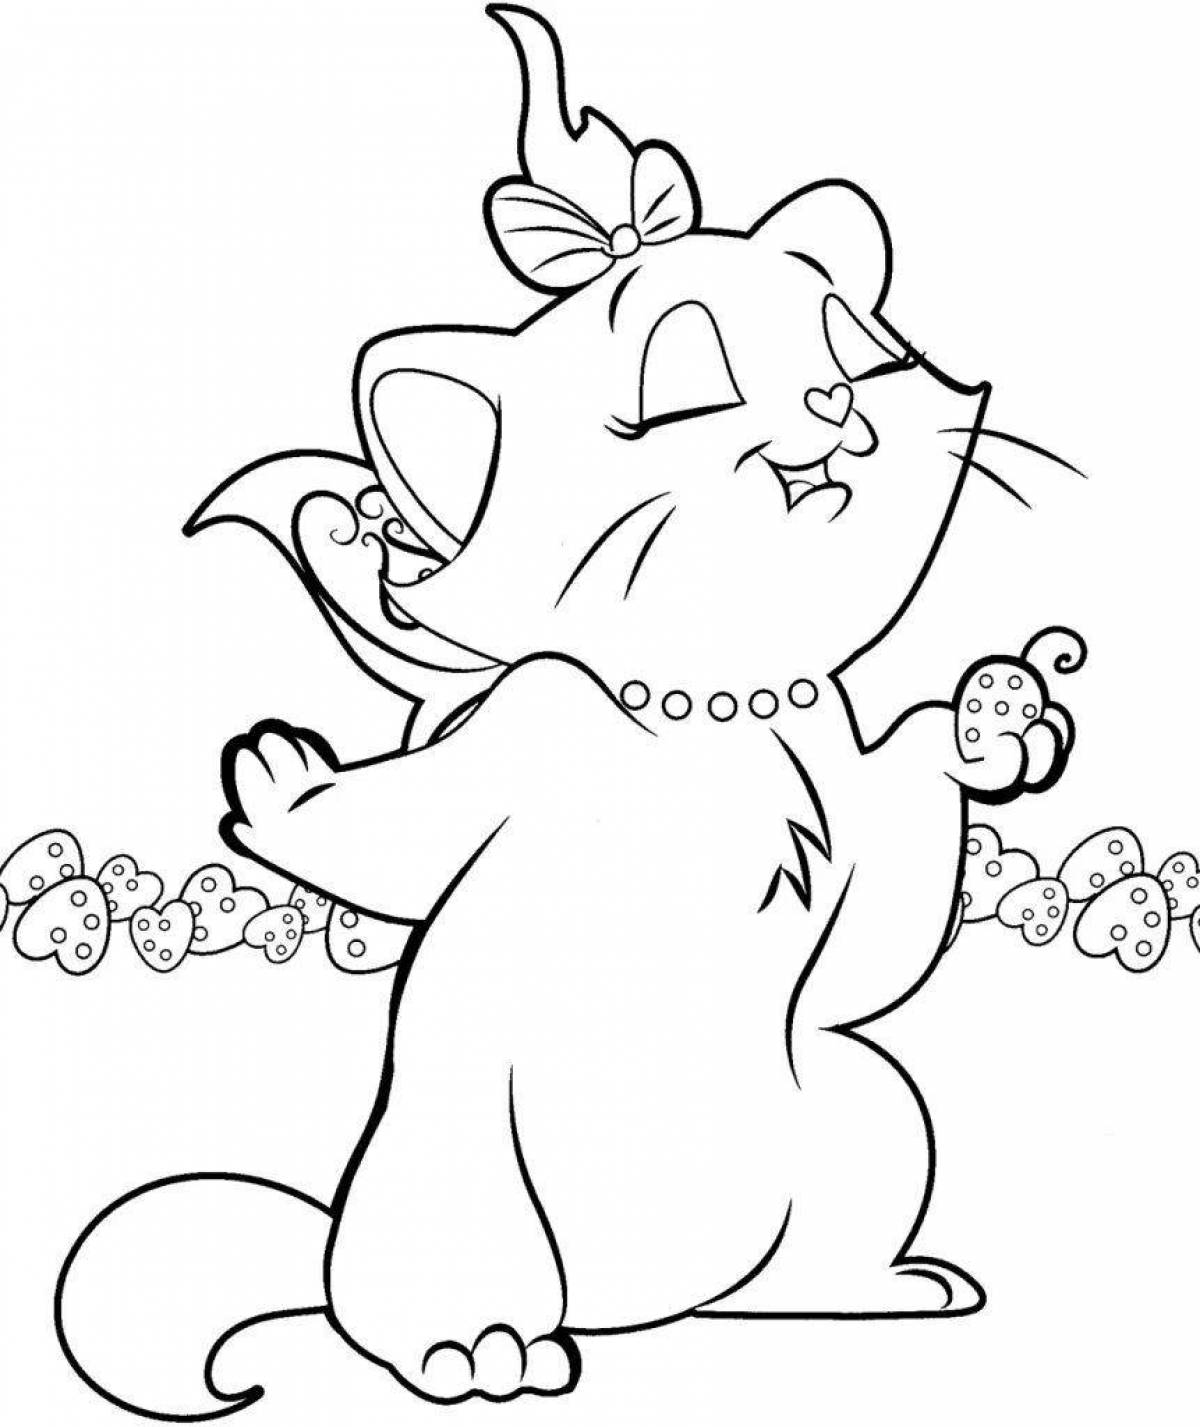 Beautiful marie kitty coloring page